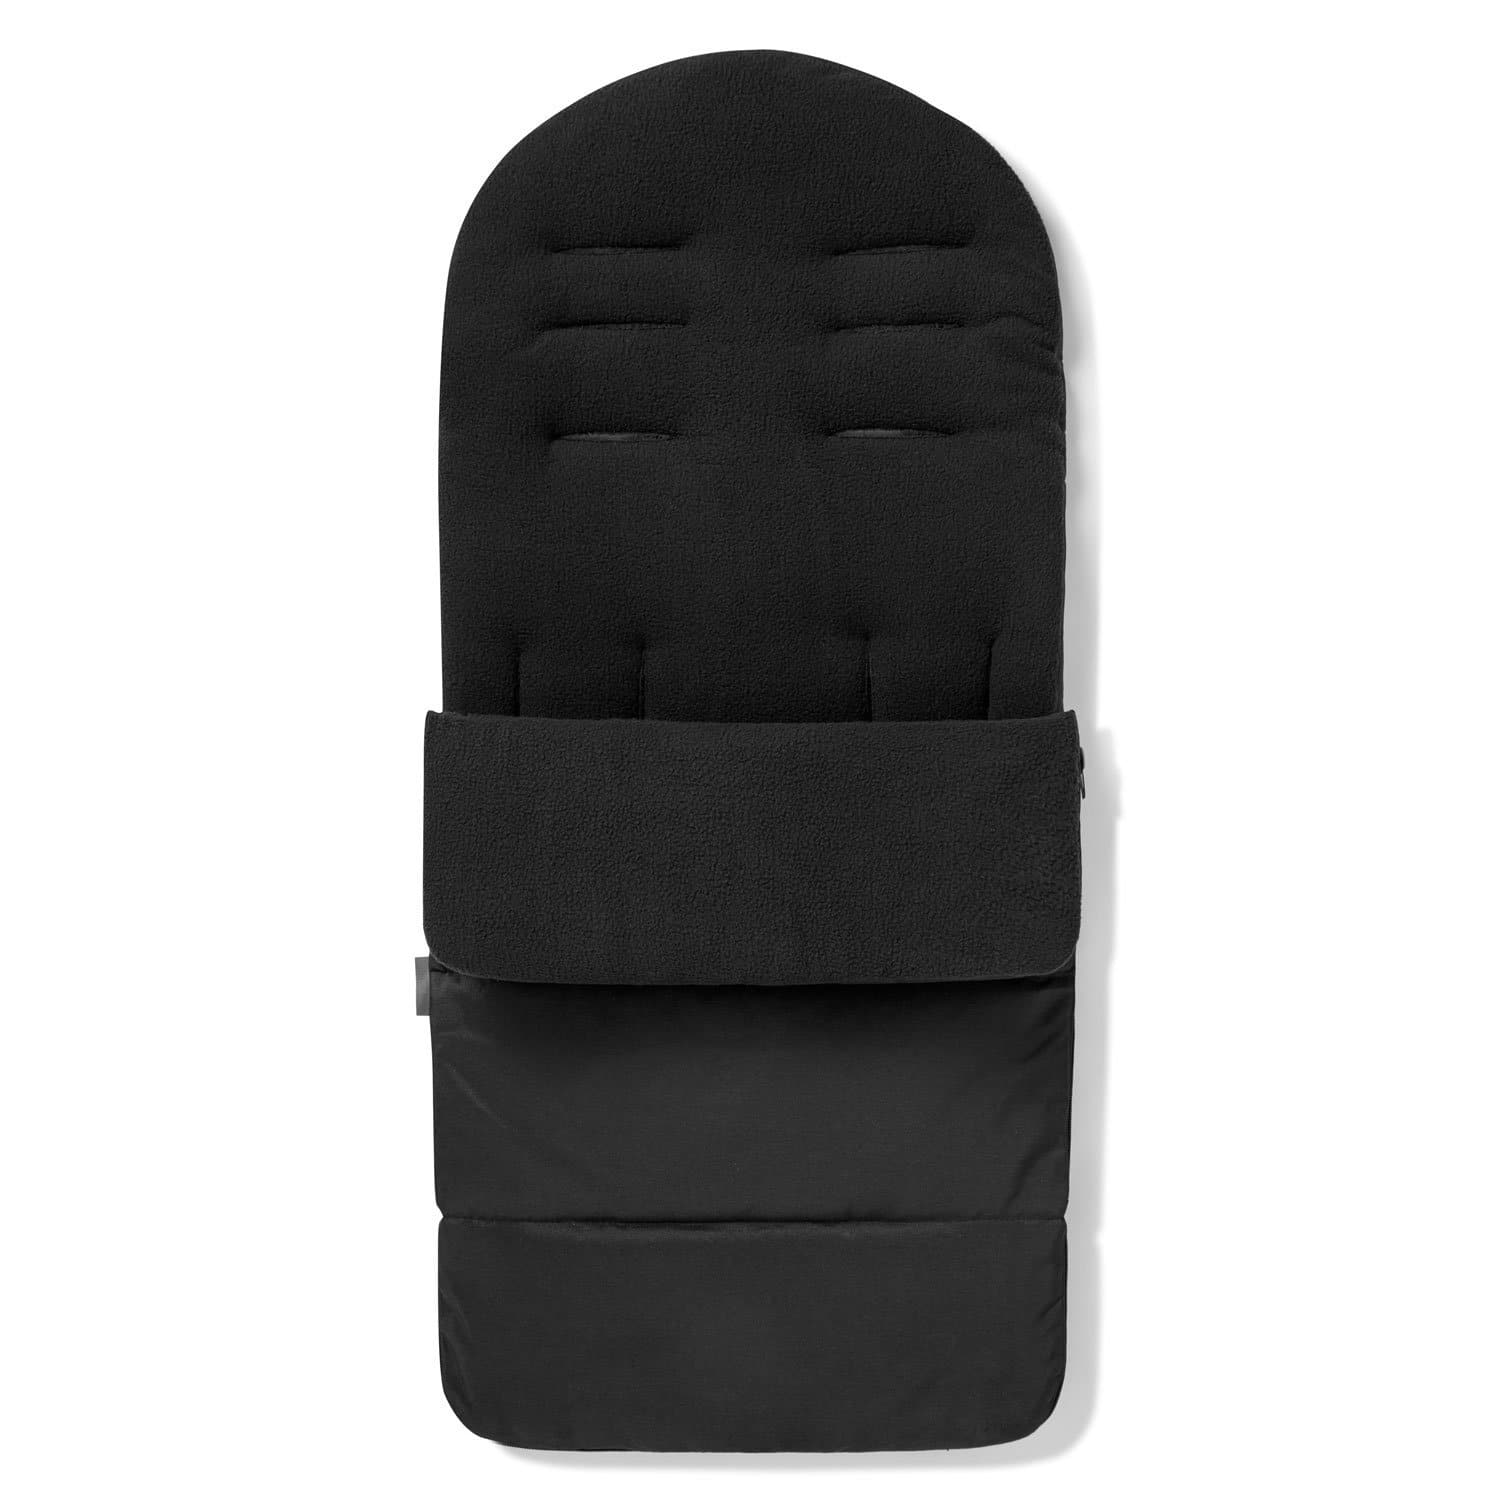 Premium Footmuff / Cosy Toes Compatible with Babystyle - Black Jack / Fits All Models | For Your Little One